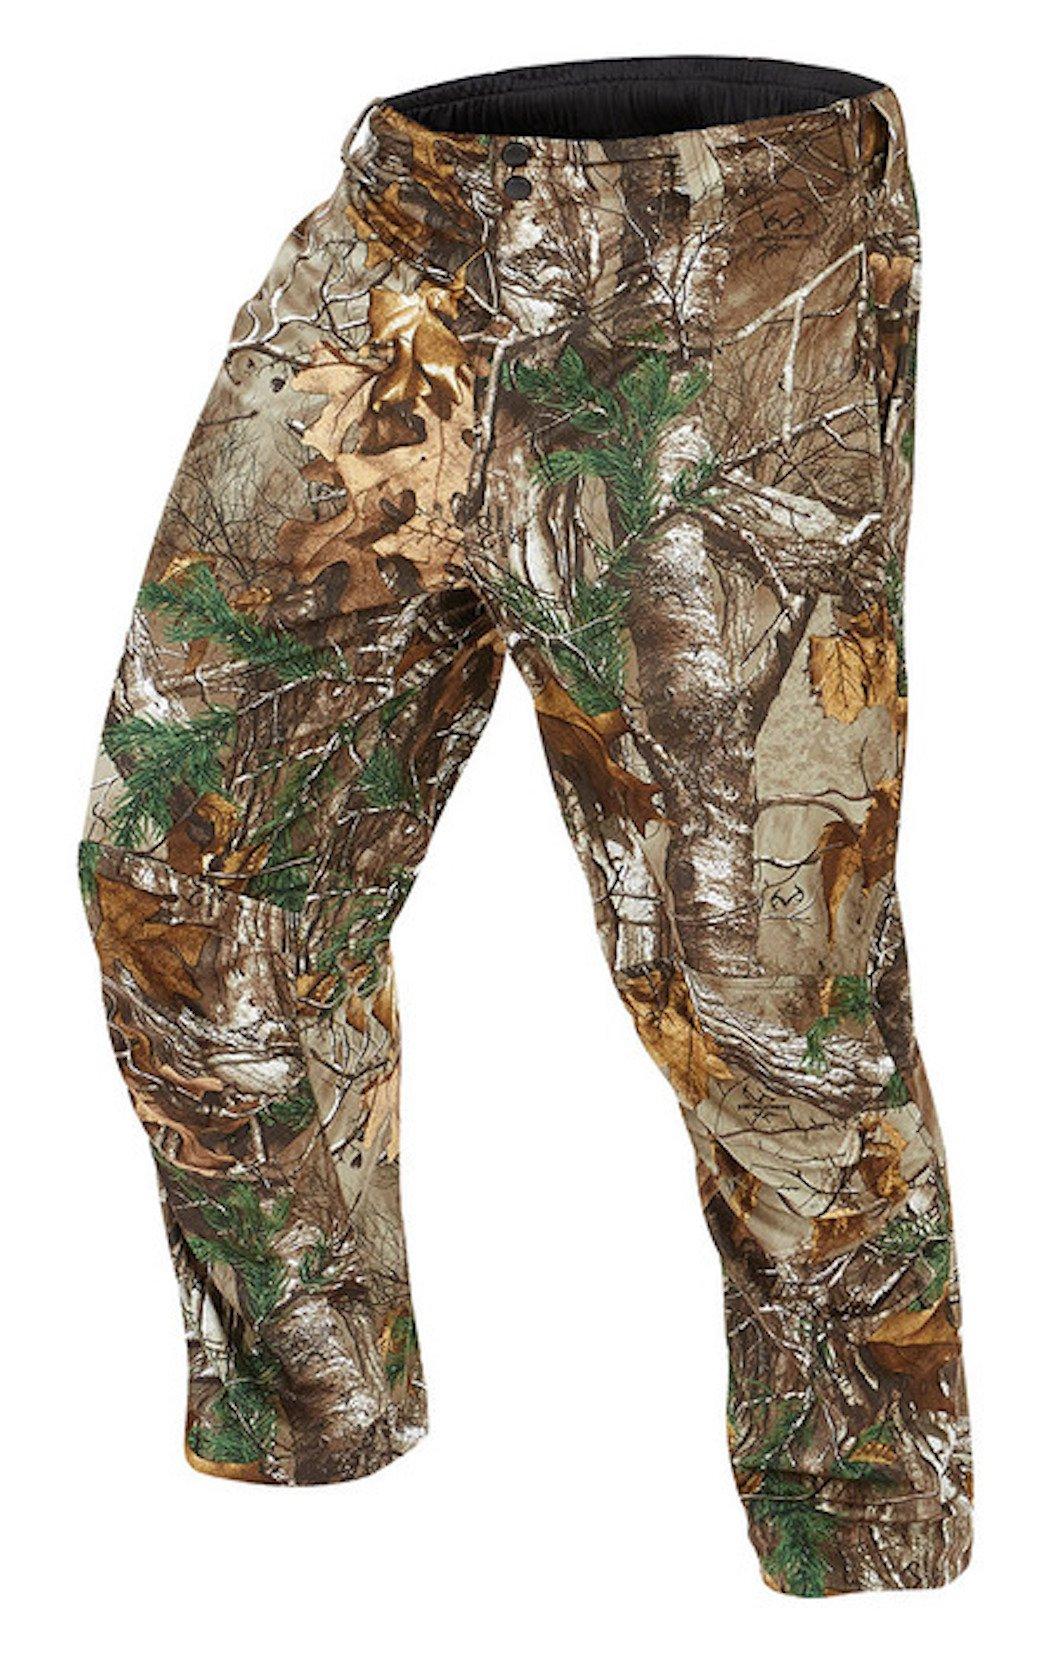 Mid-Weight Pant in Realtree Xtra